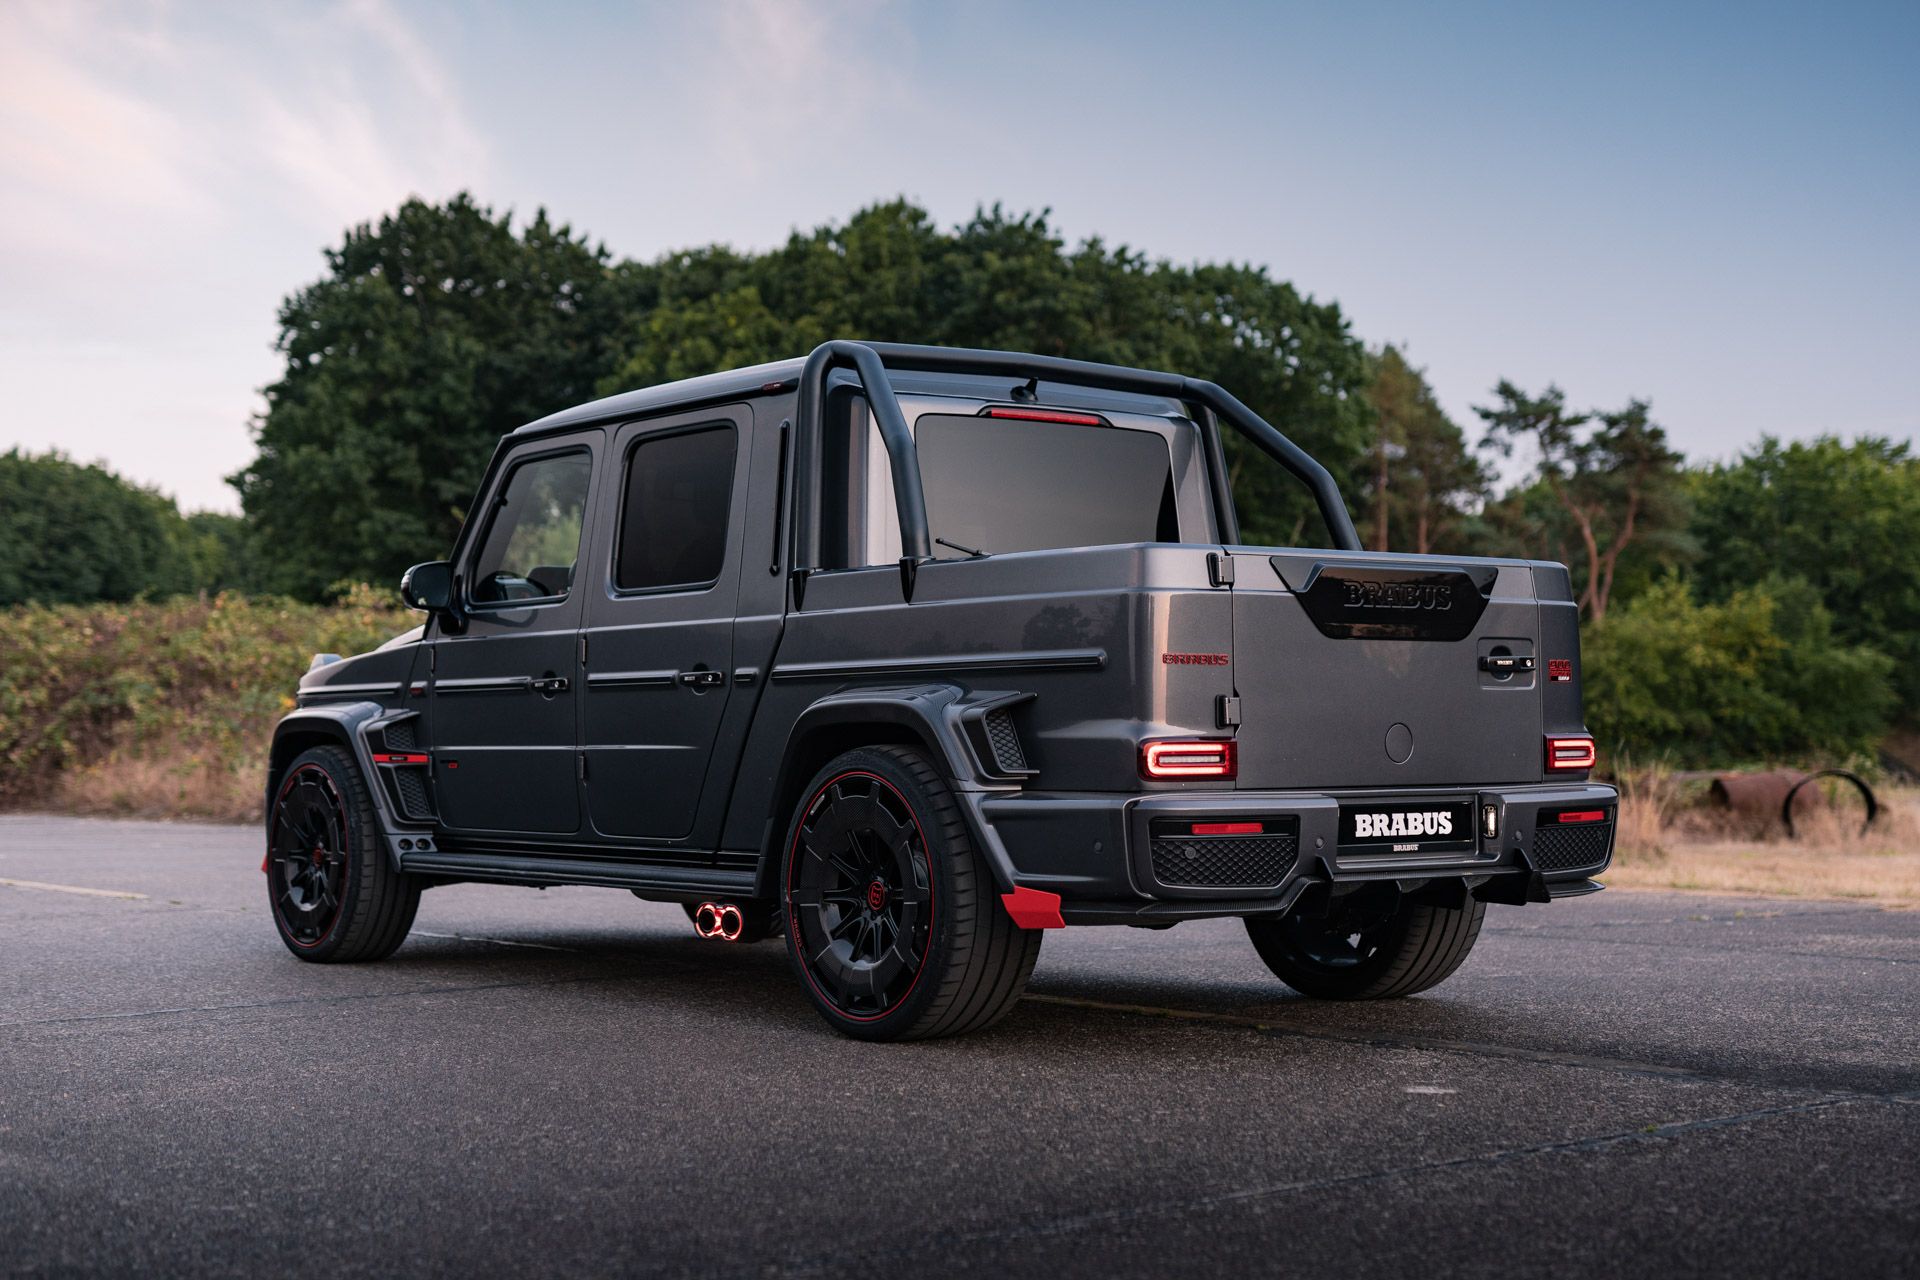 The 900-Horsepower Brabus Crawler AMG G63 Costs $1M - The Car Guide